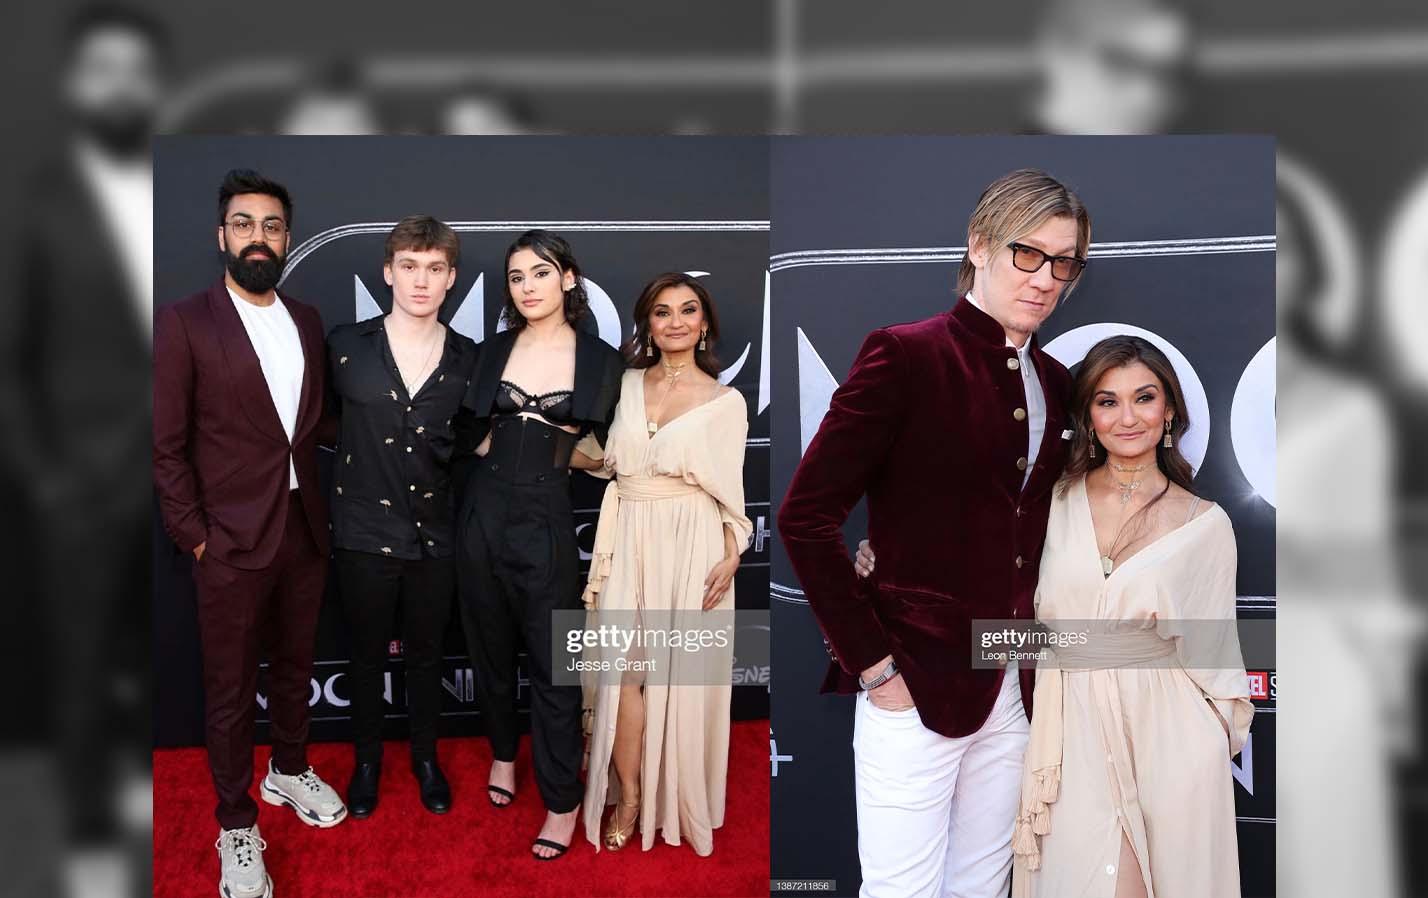 Marvel Series: Moon Knight Premiere’s red carpet - March 2022 - Erika Peña